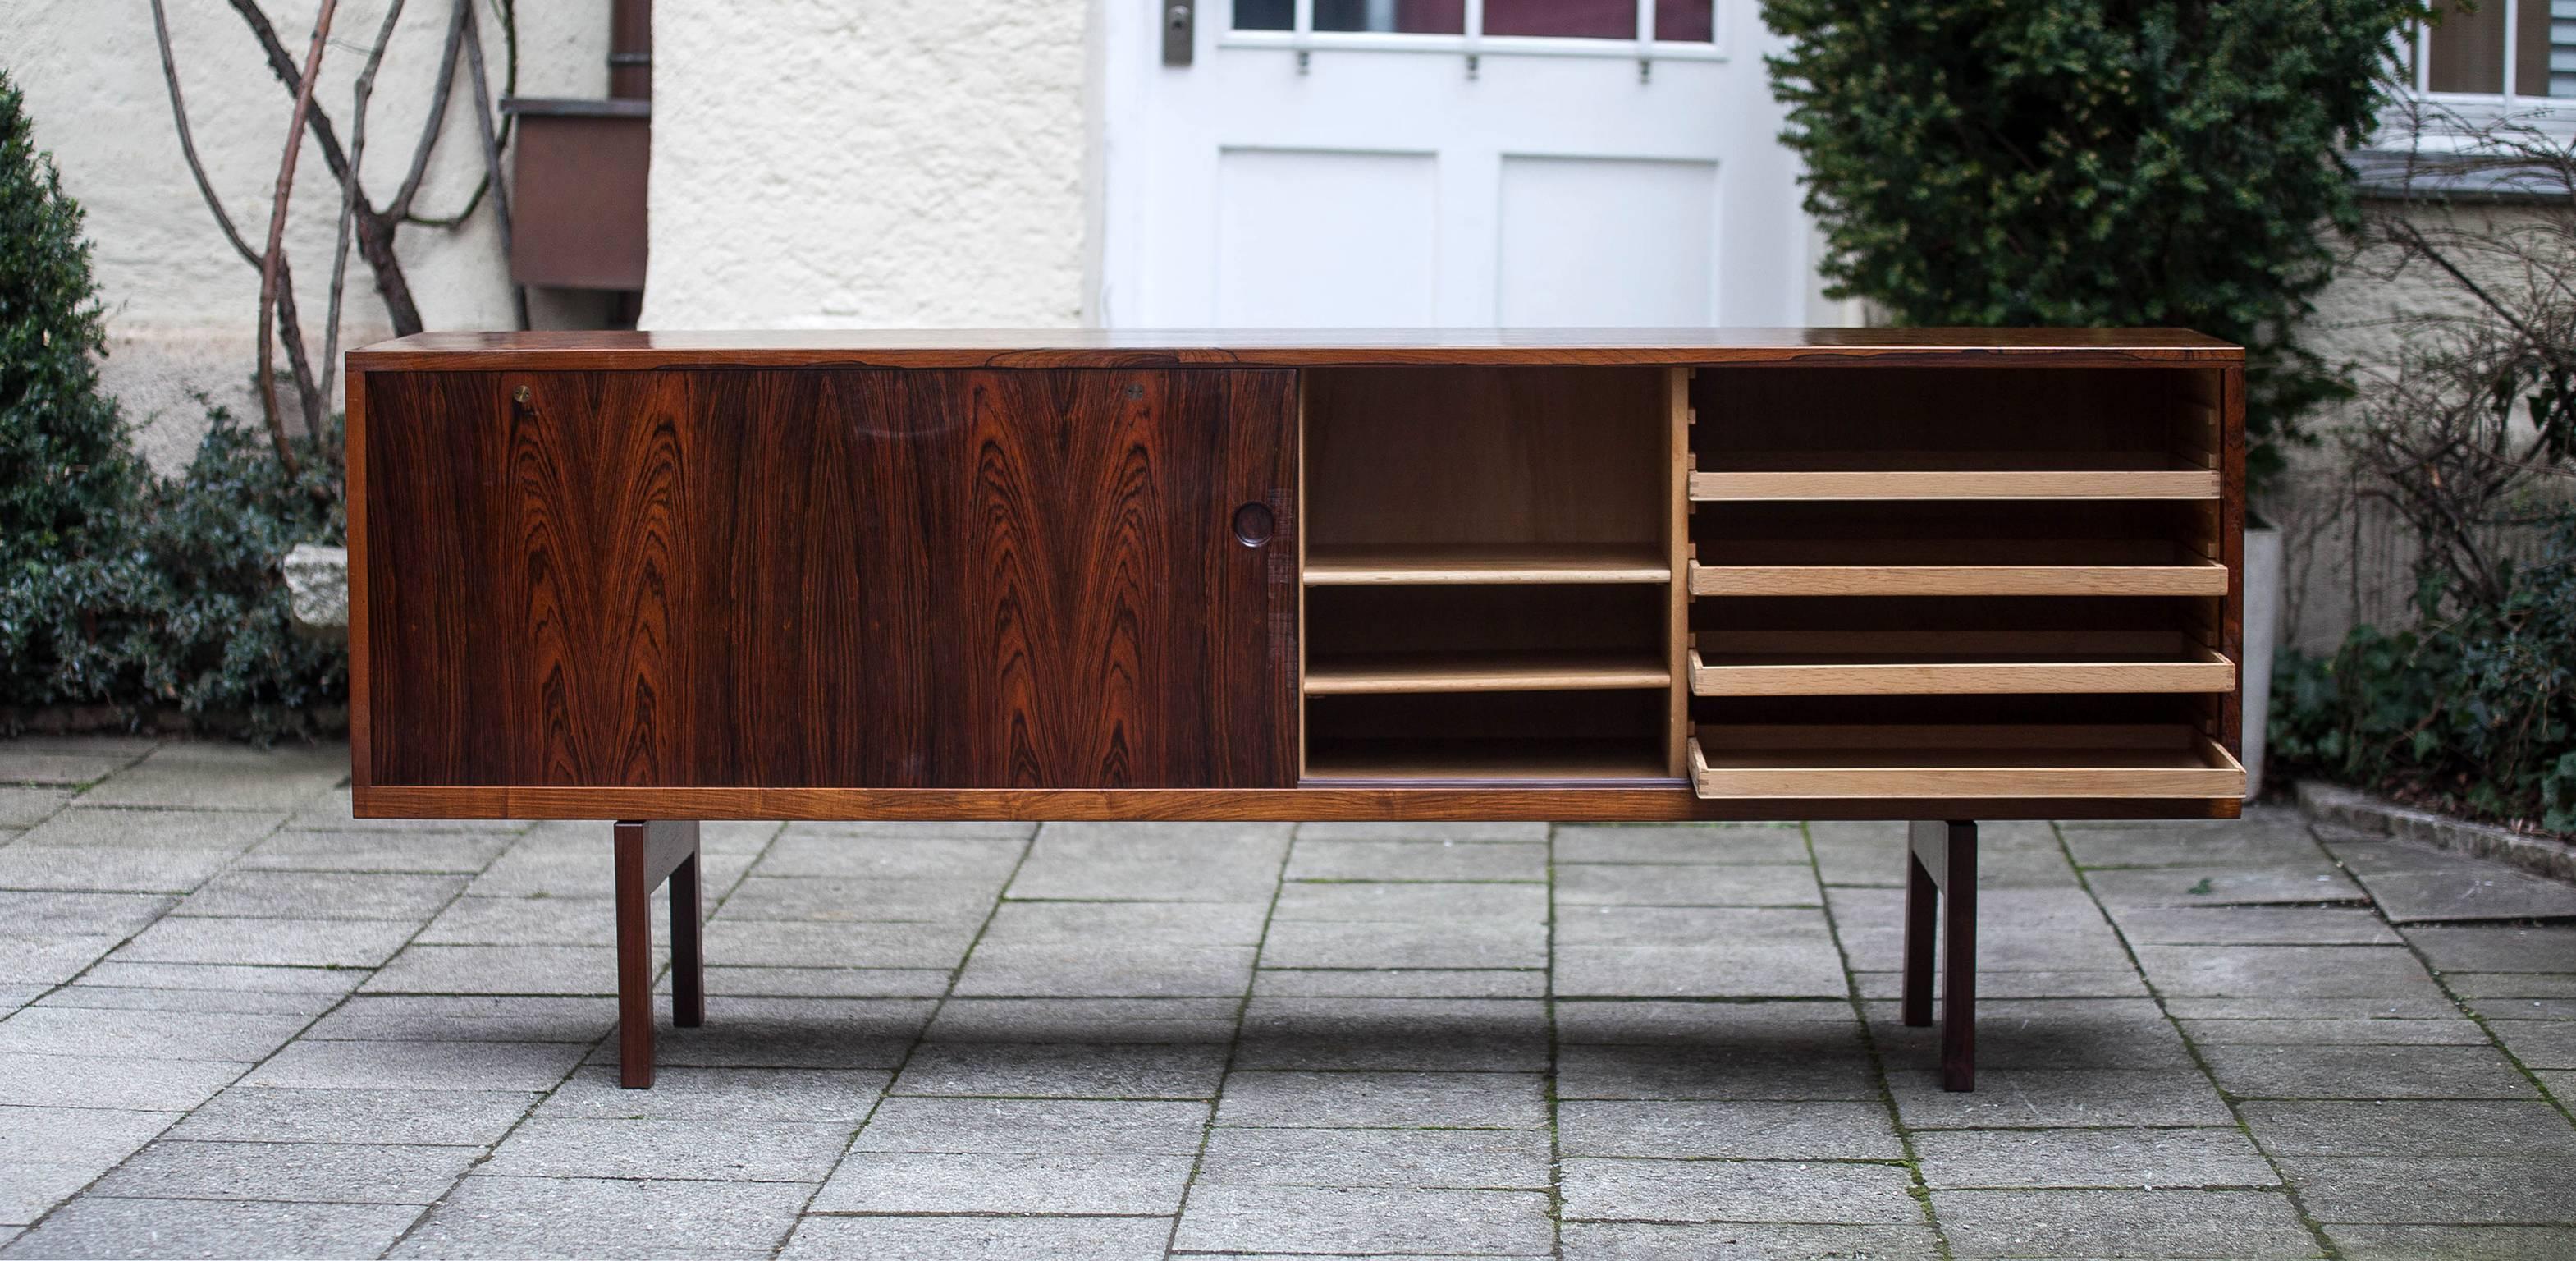 Fantastic rosewood sideboard designed by Hans Wegner for Ry Mobler.
The sideboard is signed with Danish Furniture control mark.